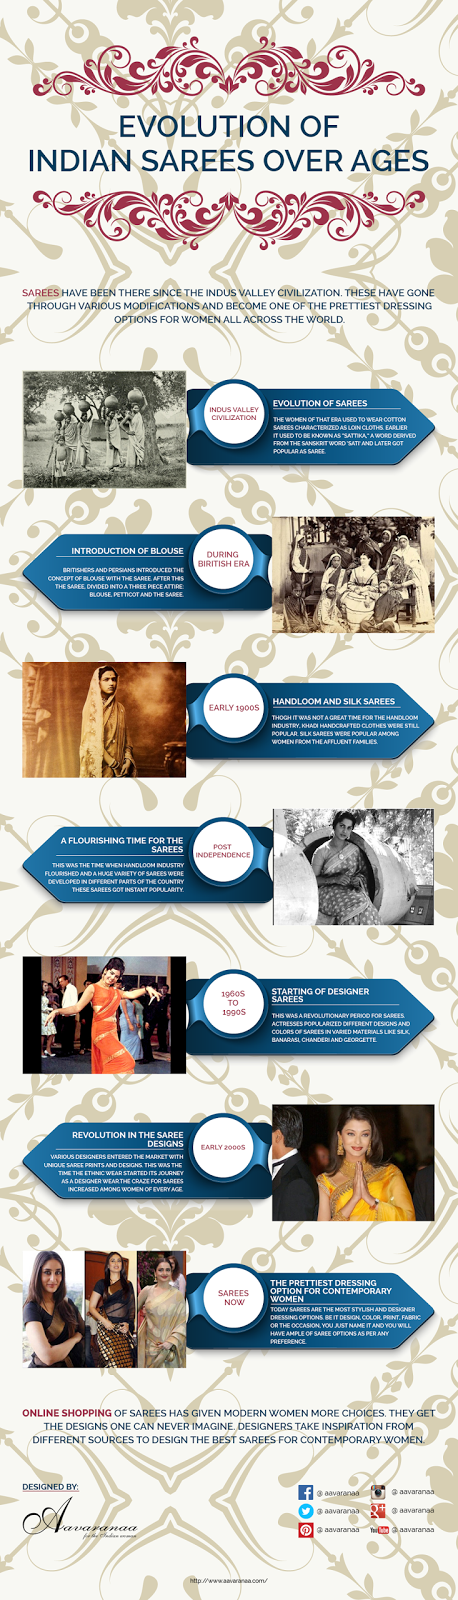 The Transformational Journey of Sarees over Years | Free Infografic Post